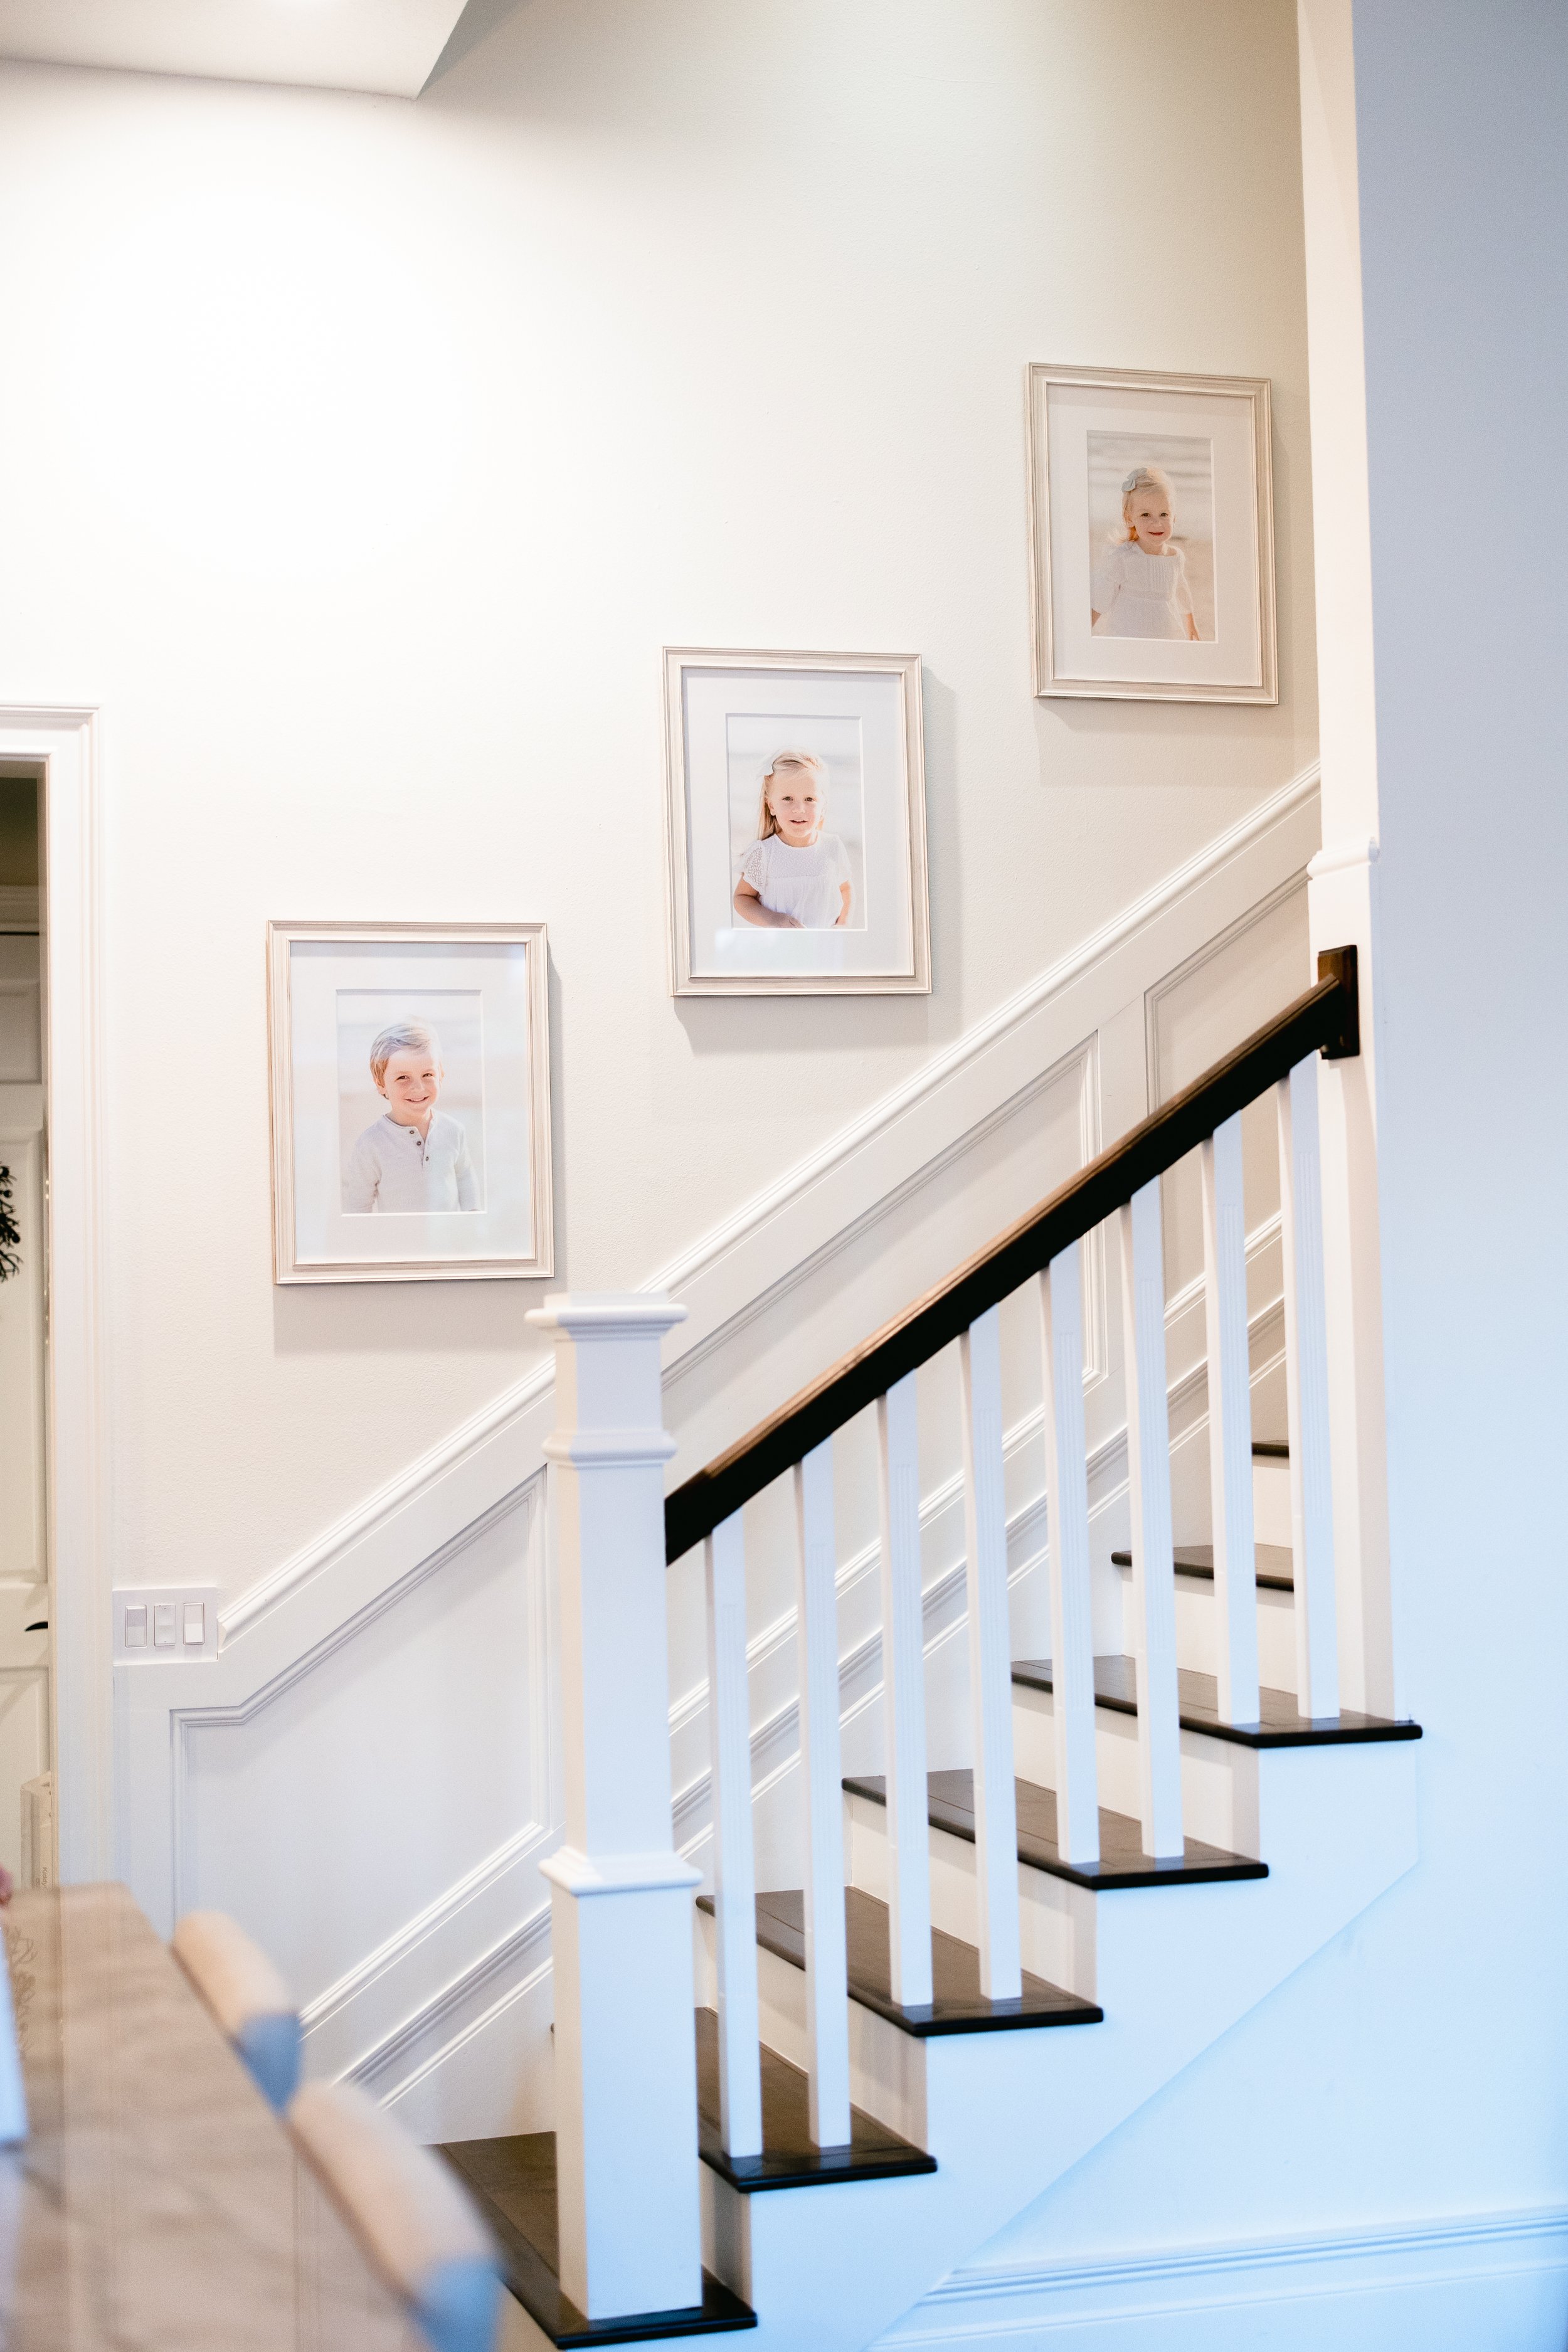   Children’s portraits hung above stairs with white frames and mats. Family portrait display inspiration family photo ideas #UnionCountyFamilyPhotographer #MorrisCountyFamilyPhotographer #NorthernNewJerseyFamilyPhotographer #NorthernNewJerseyPhotogra